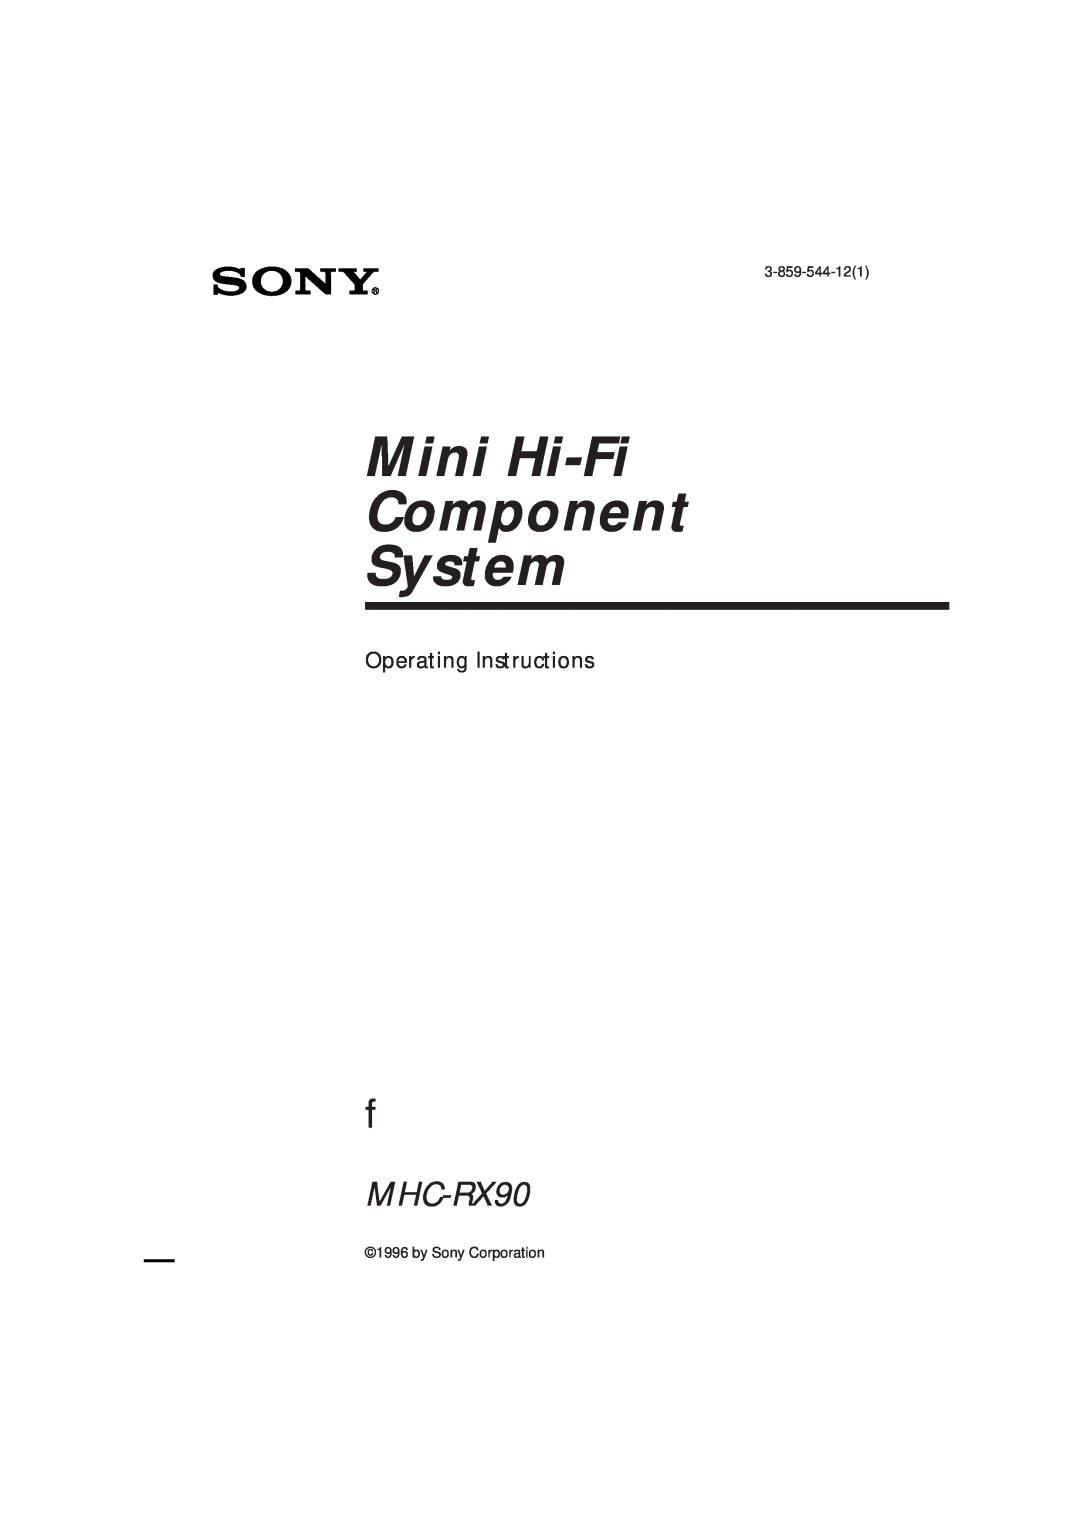 Sony MHC-RX90 manual 3-859-544-121, by Sony Corporation, Mini Hi-Fi Component System, Operating Instructions 